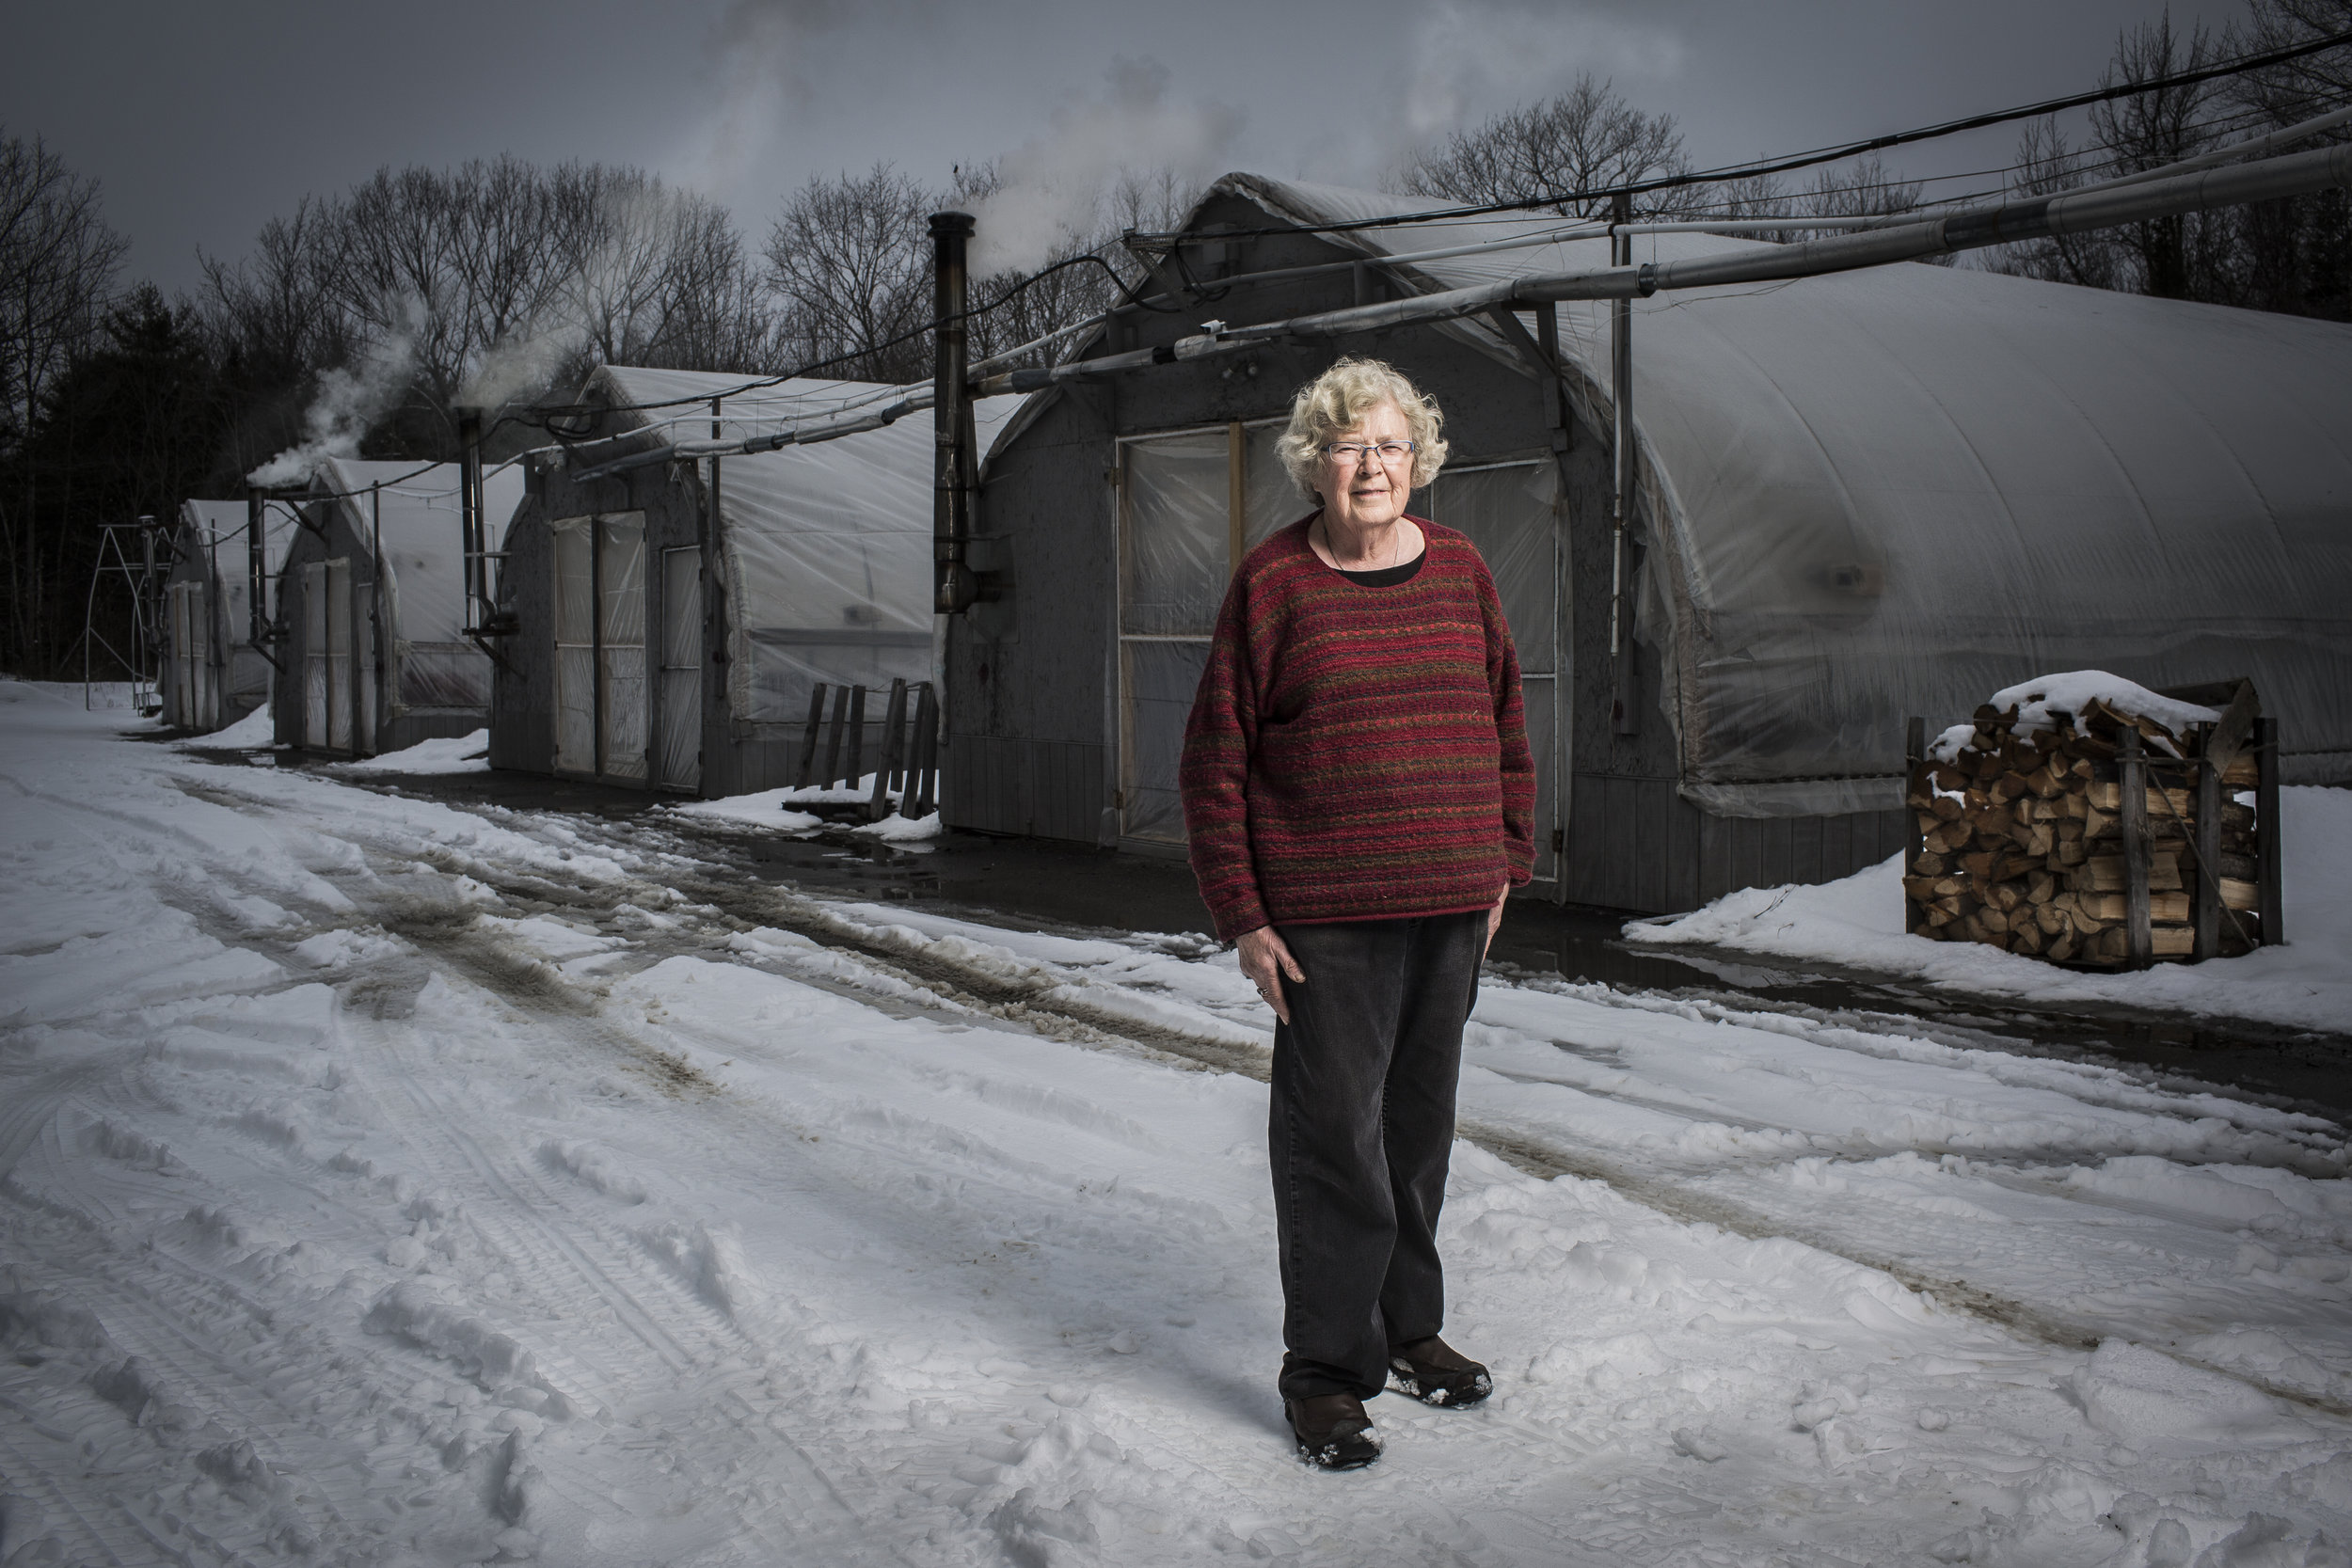  Beth Hutchings, 81, owner of Hutchings Greenhouse, in Eddington, Maine, is originally from Ireland, but has made Maine her home for 62 years. When Beth was younger she visited with her cousins in Belfast, Ireland, and sometimes visited the docks in 